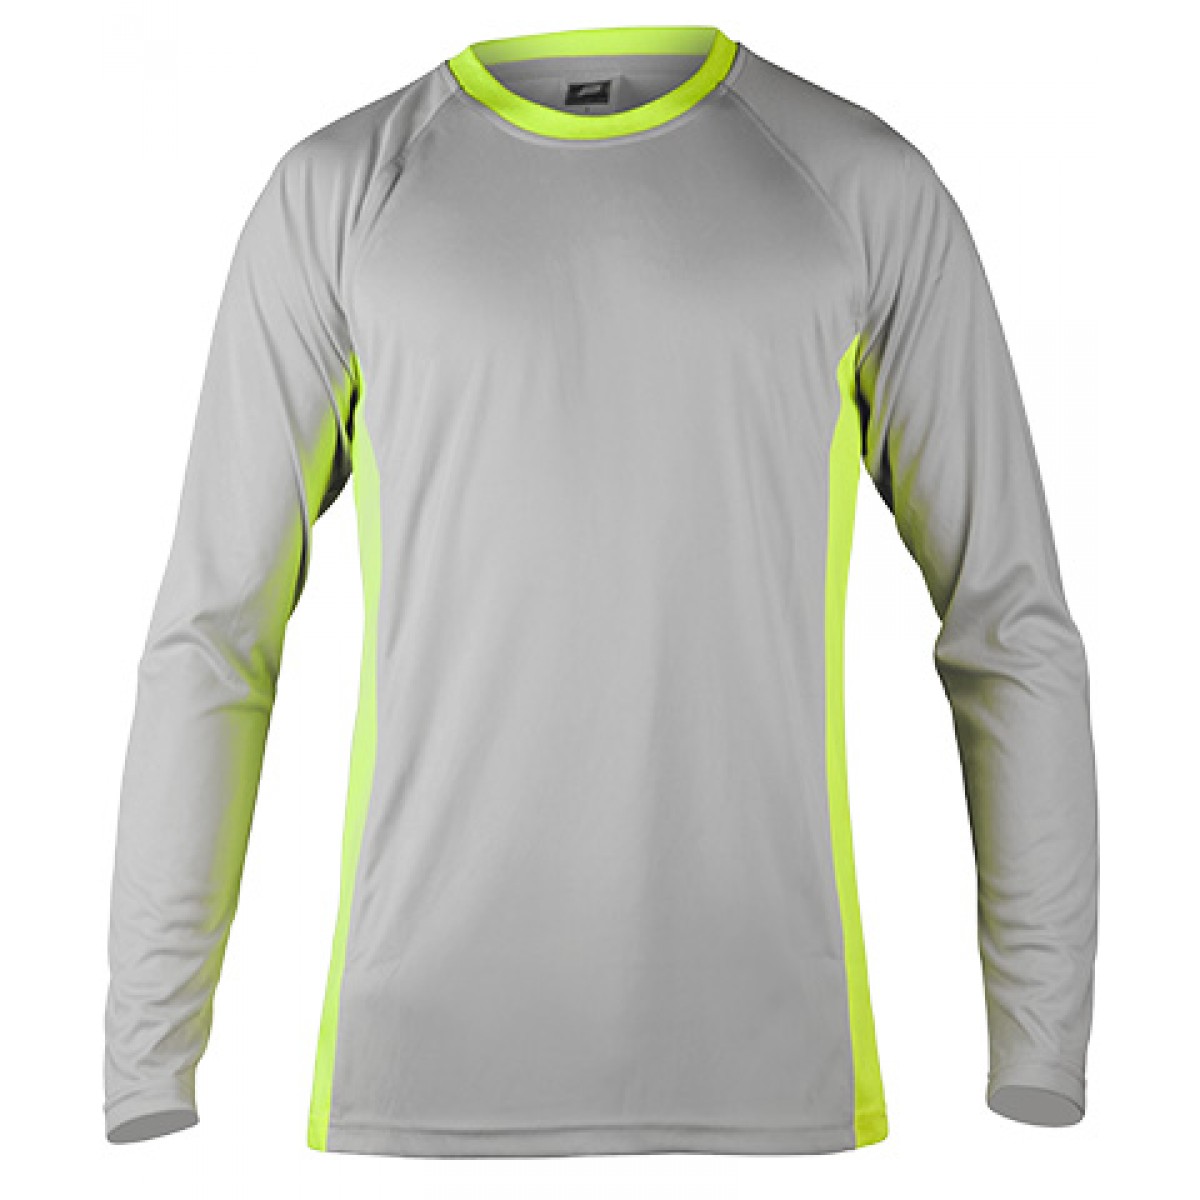 Long Sleeves Performance With Side Insert